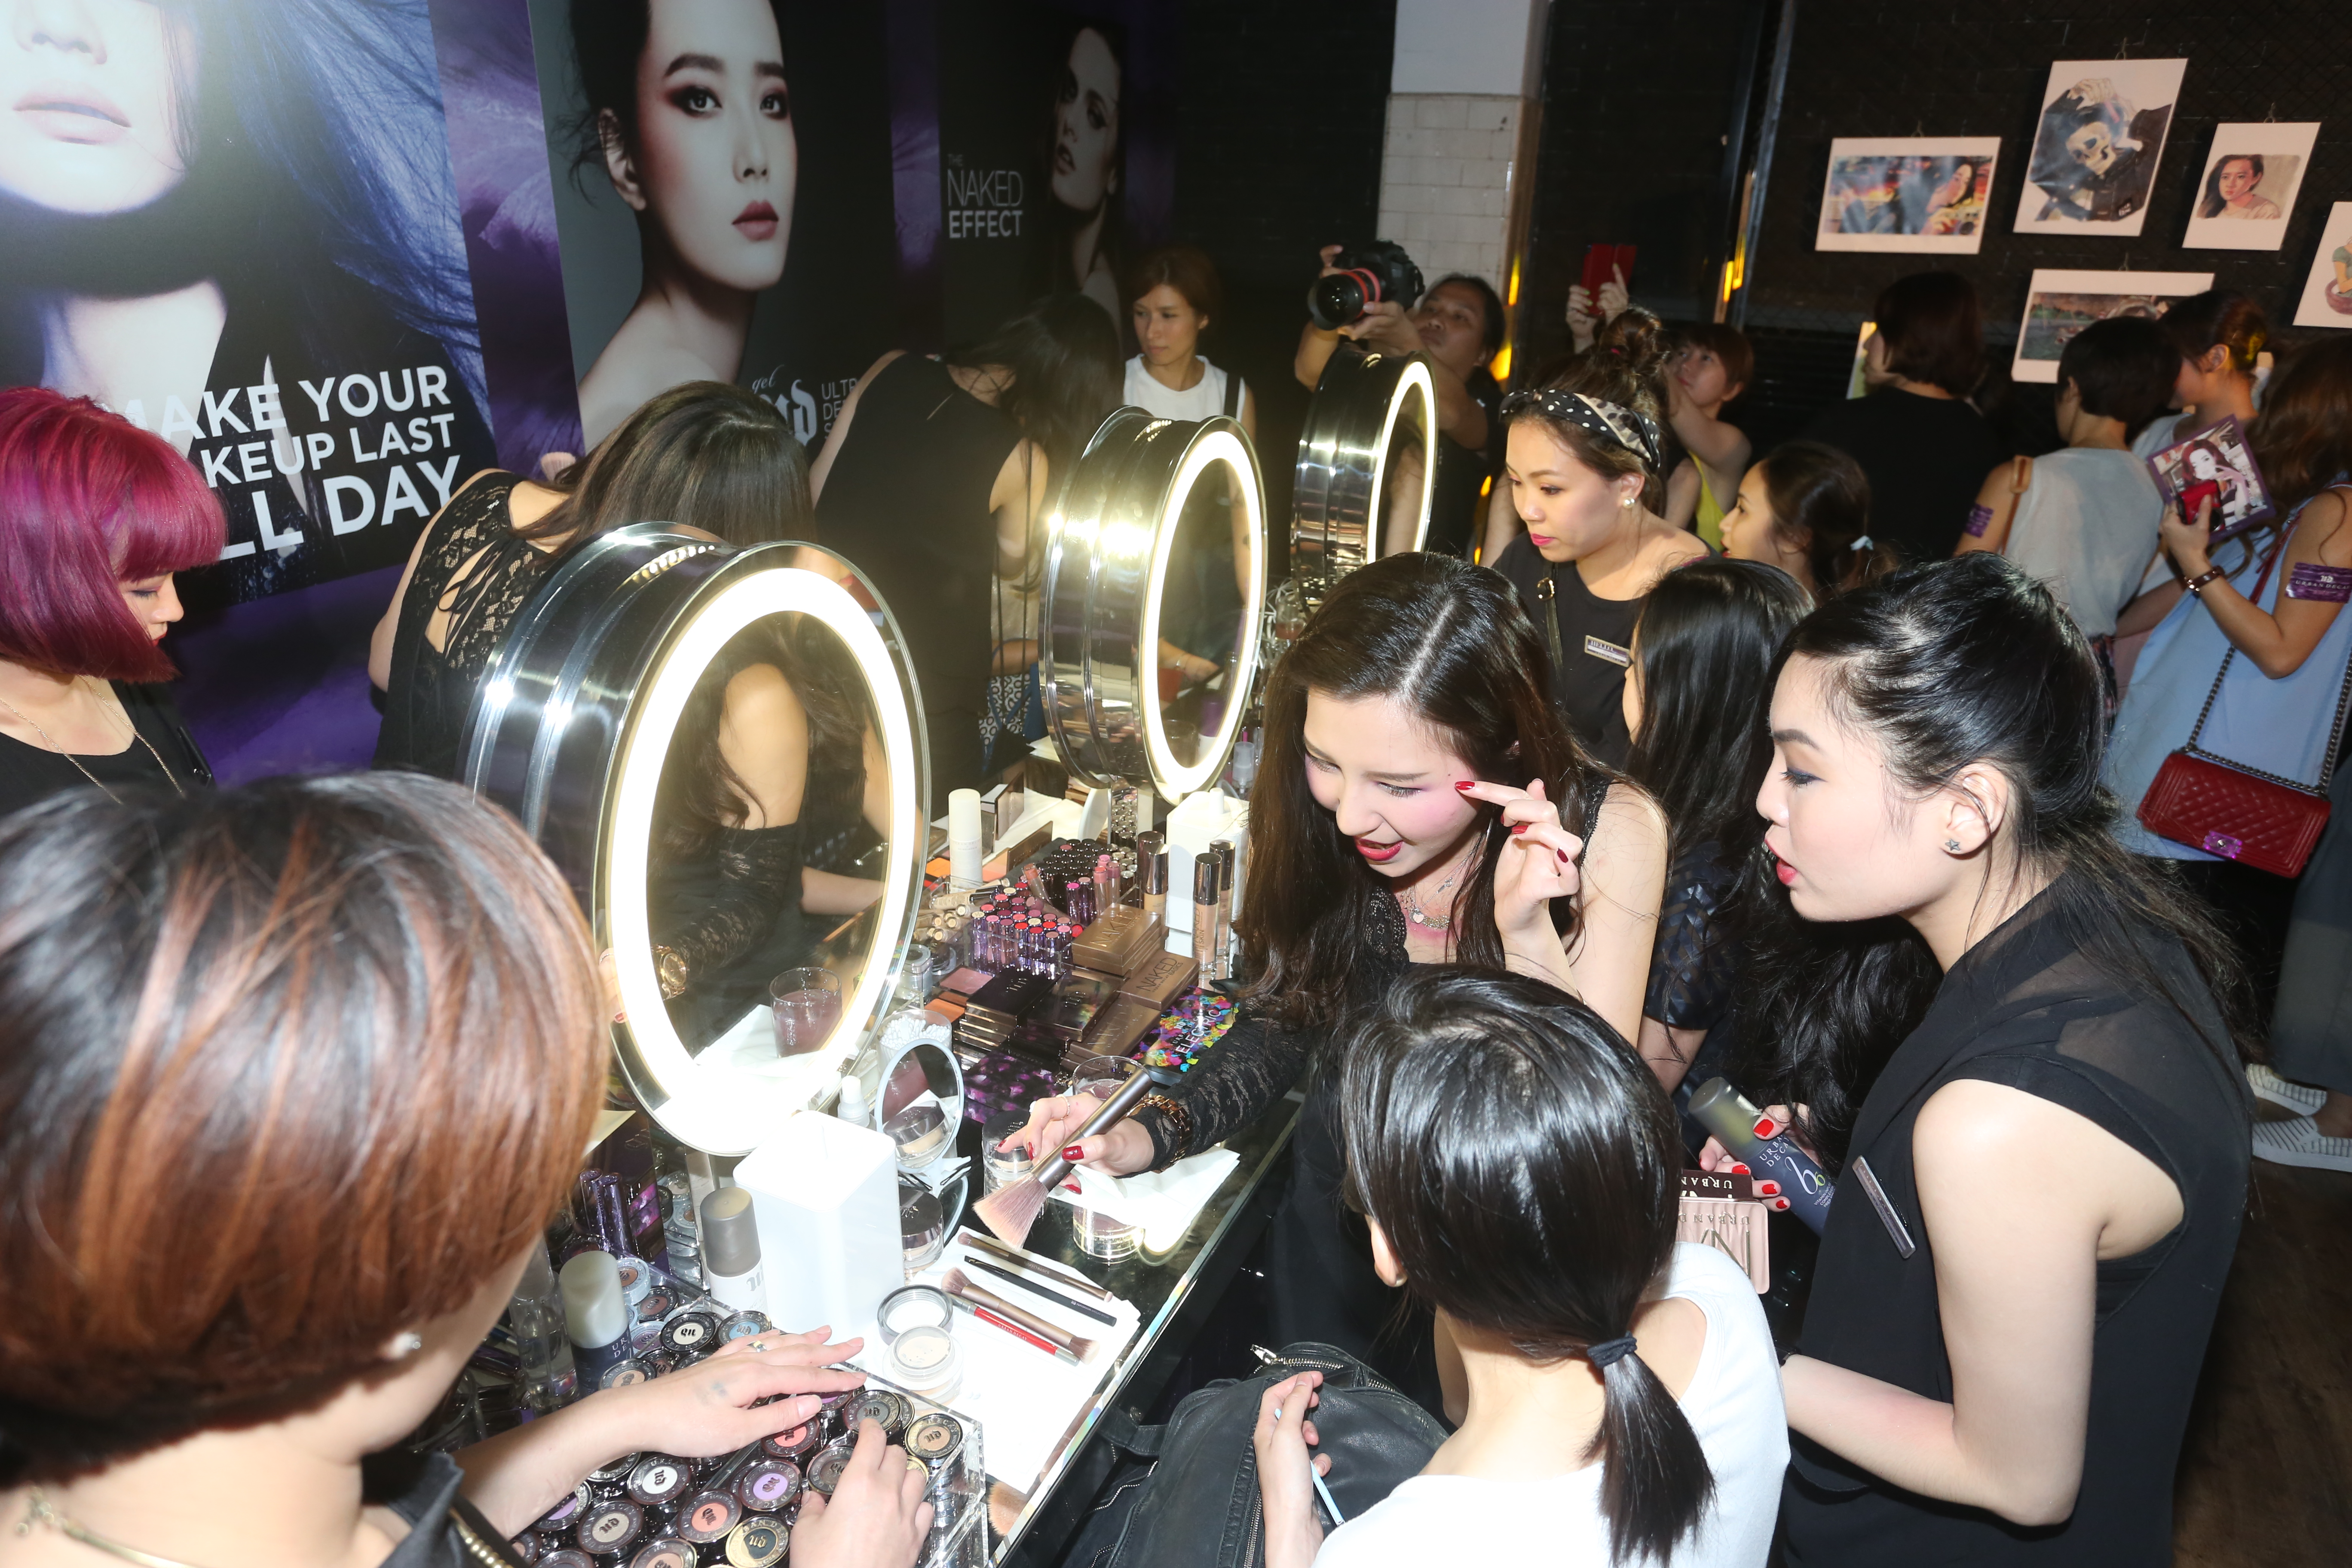 Urban Decay make-up booth at the Fringe Club launch party